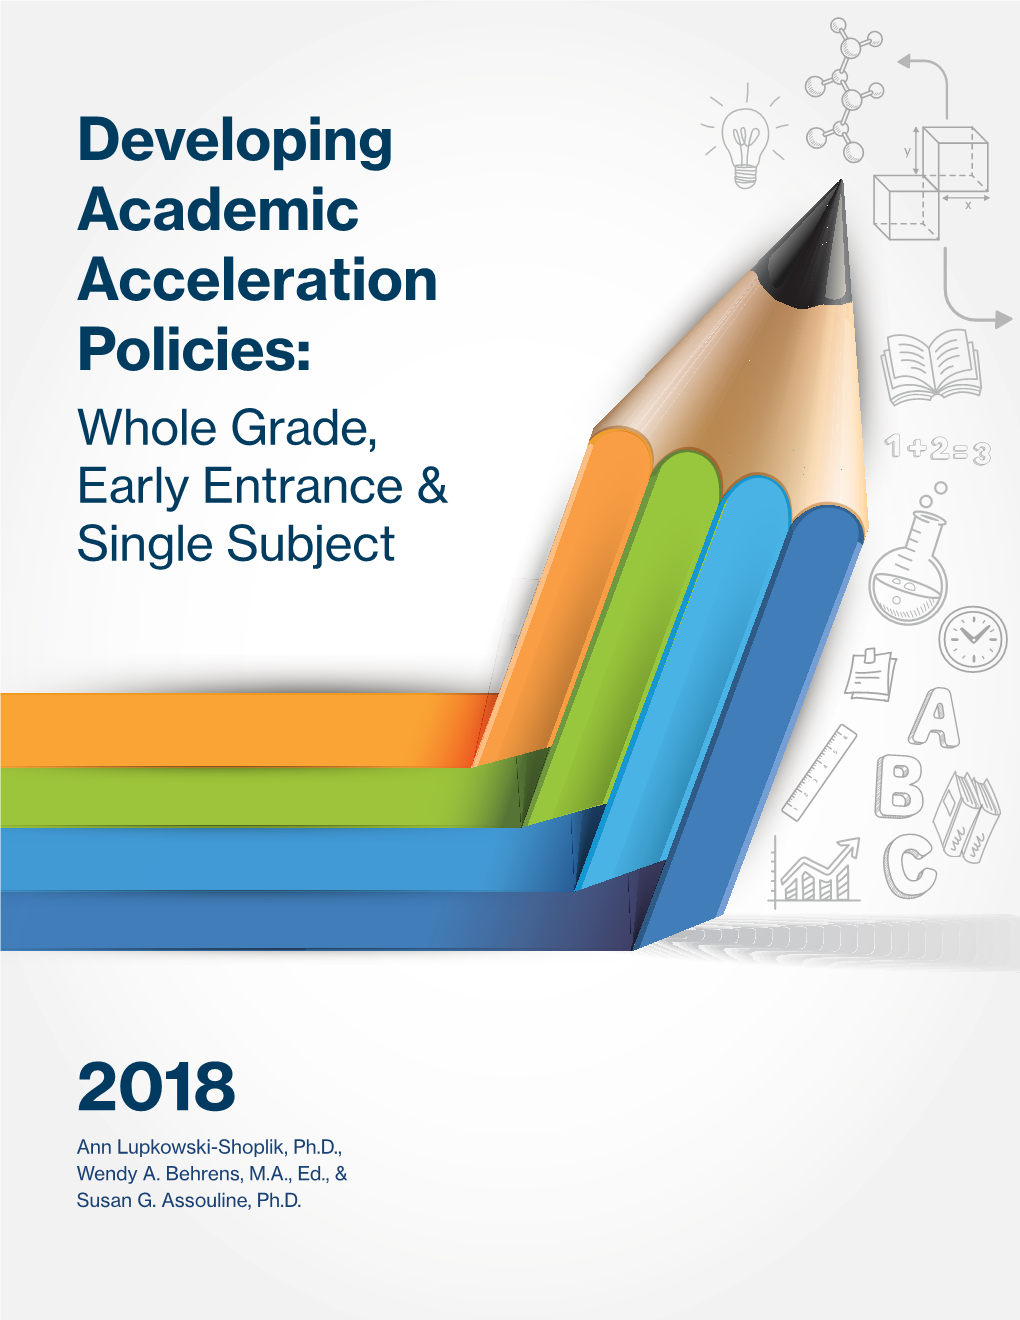 Developing Academic Acceleration Policies: Whole Grade, Early Entrance & Single Subject